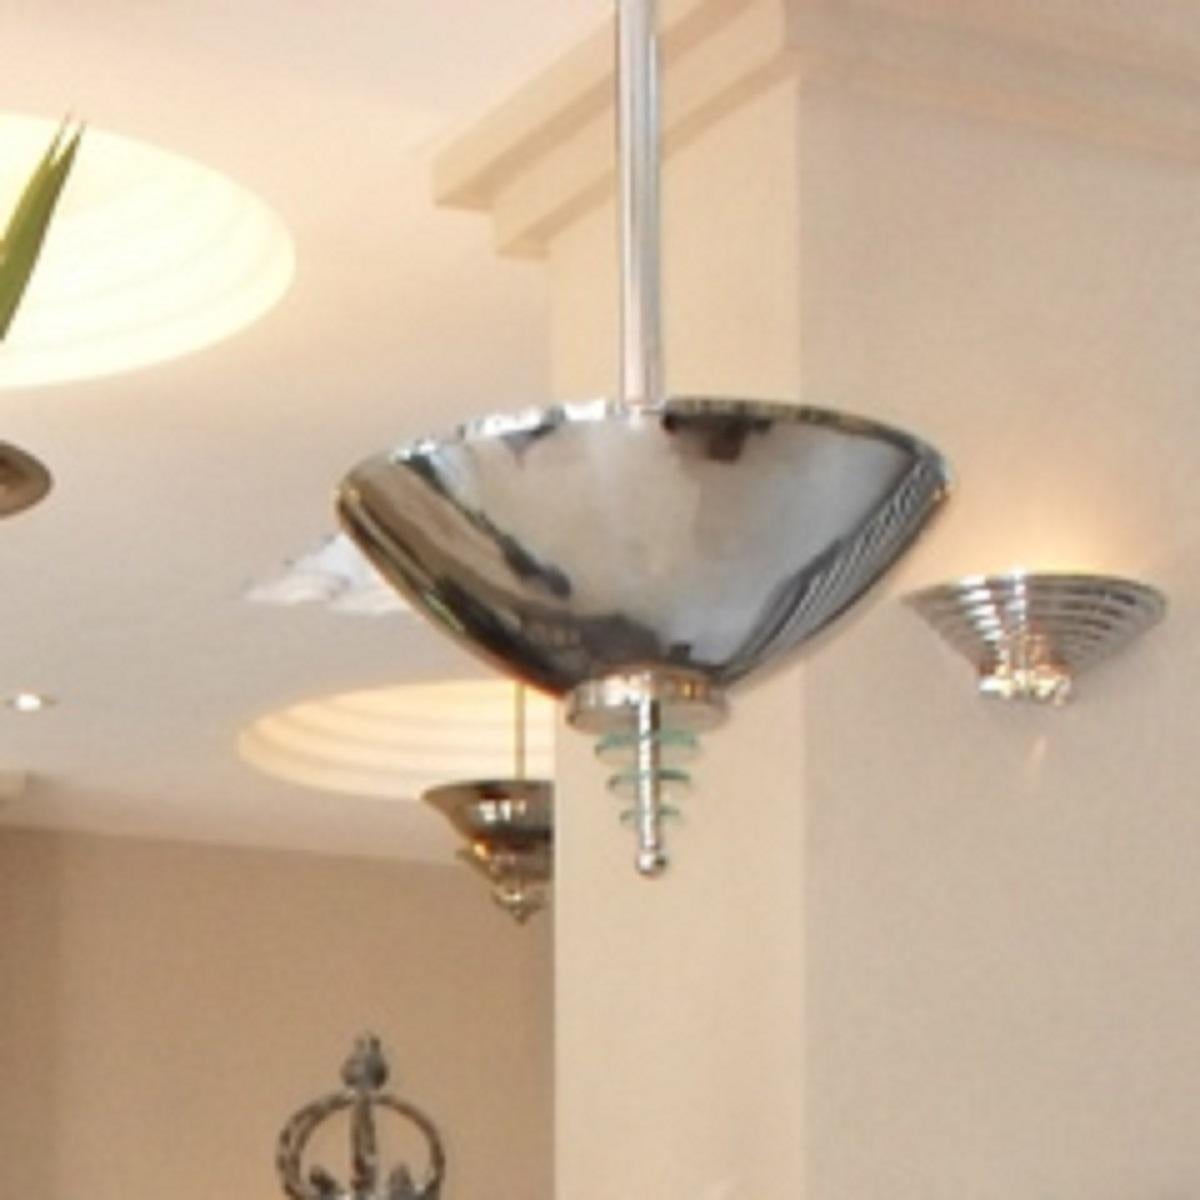 Amaizing Pair of Art Deco Chandeliers in Glass and Chrome, Style, 1935 For Sale 6